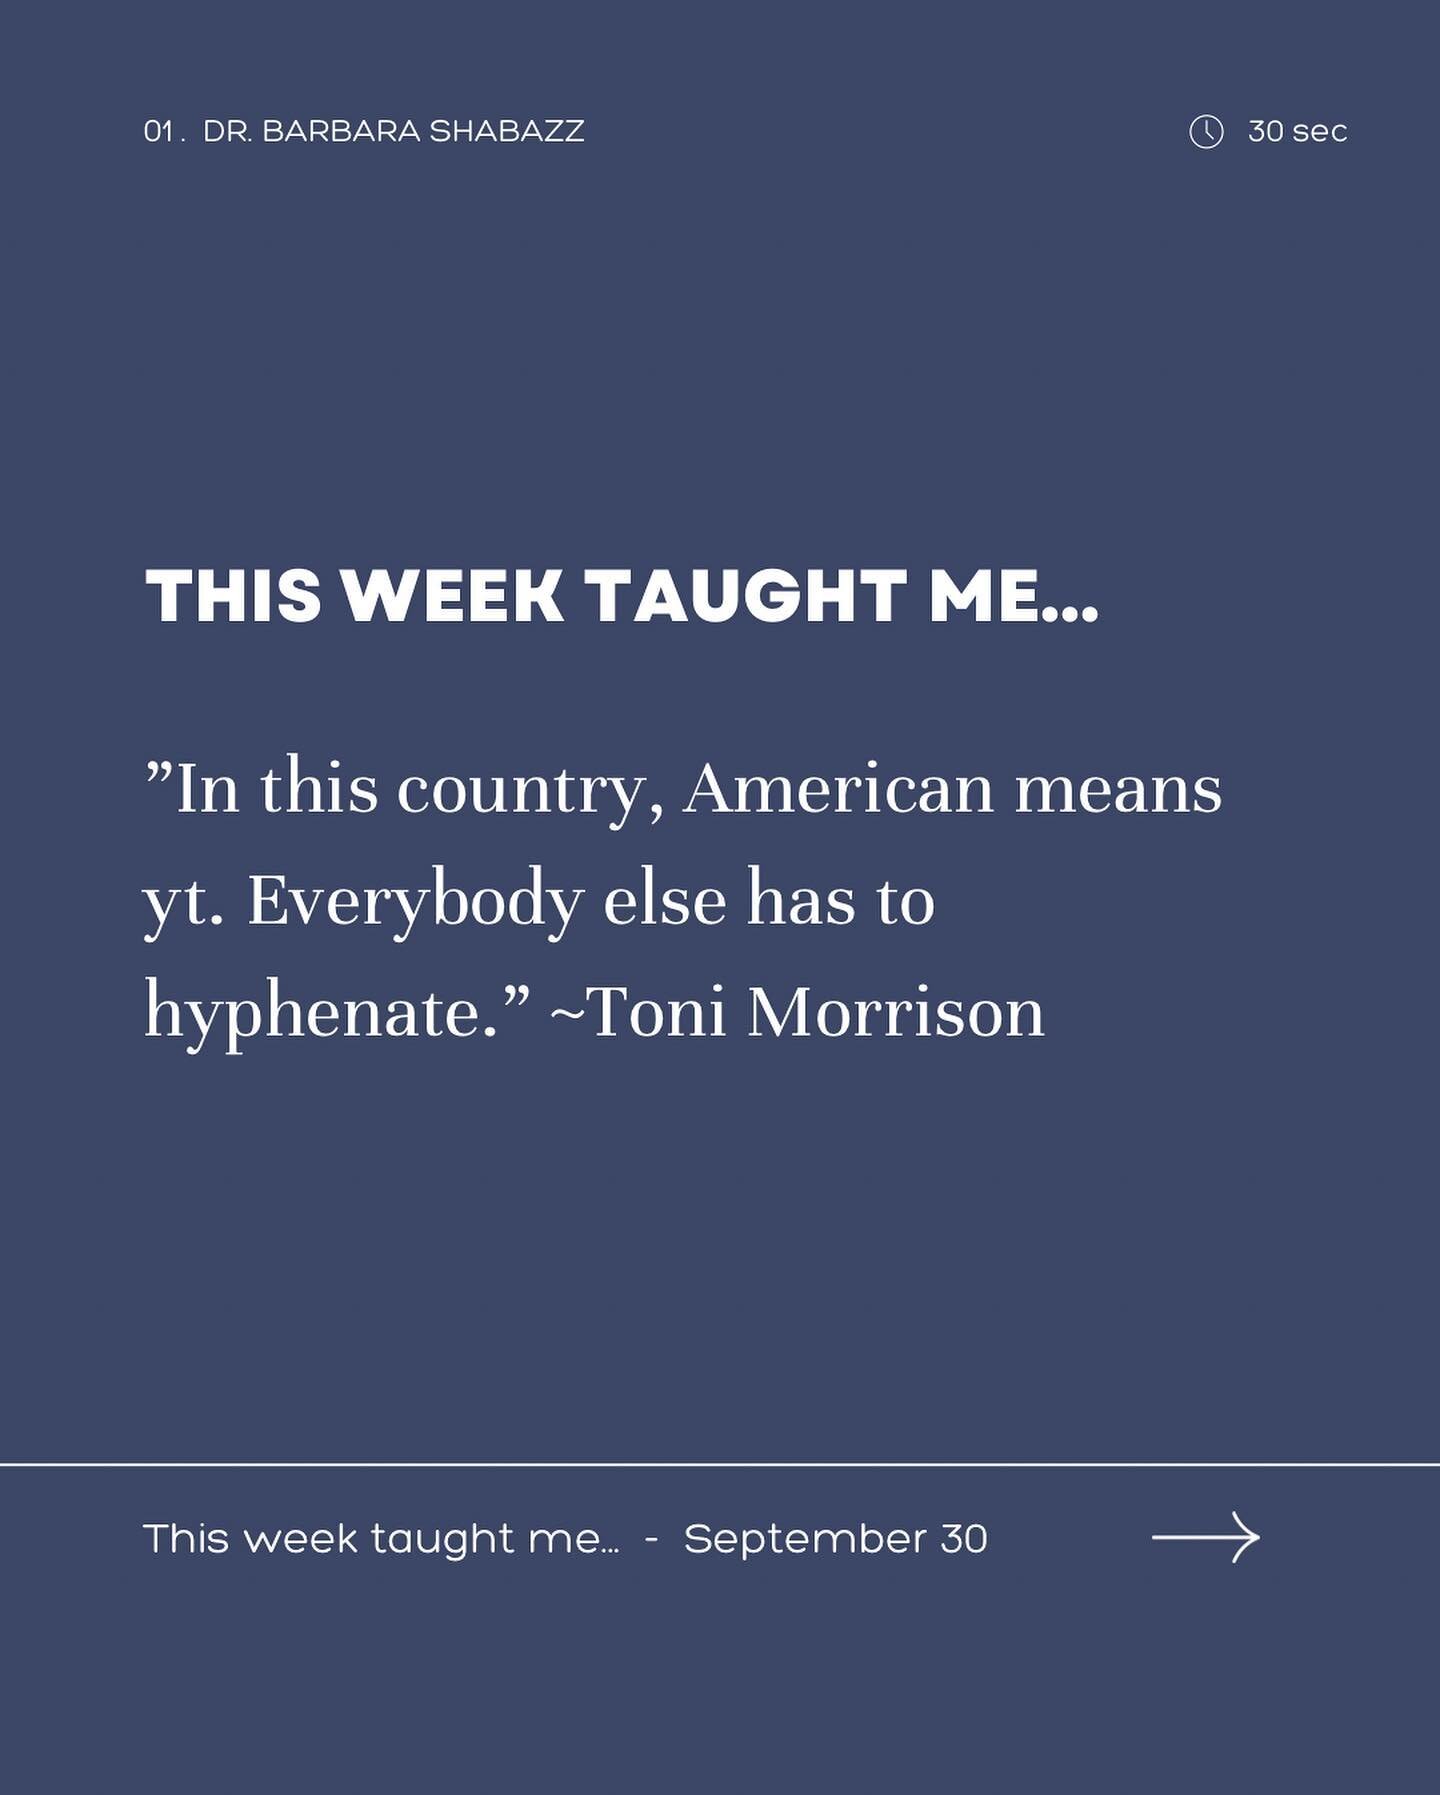 🌊This week taught me:
.
1.&rdquo;In this country, American means yt. Everybody else has to hyphenate.&rdquo; ~Toni Morrison
.
2.&rdquo;&hellip;If they ban a book&hellip;haul your a$$ to the nearest bookstore or library ASAP and find out what they do